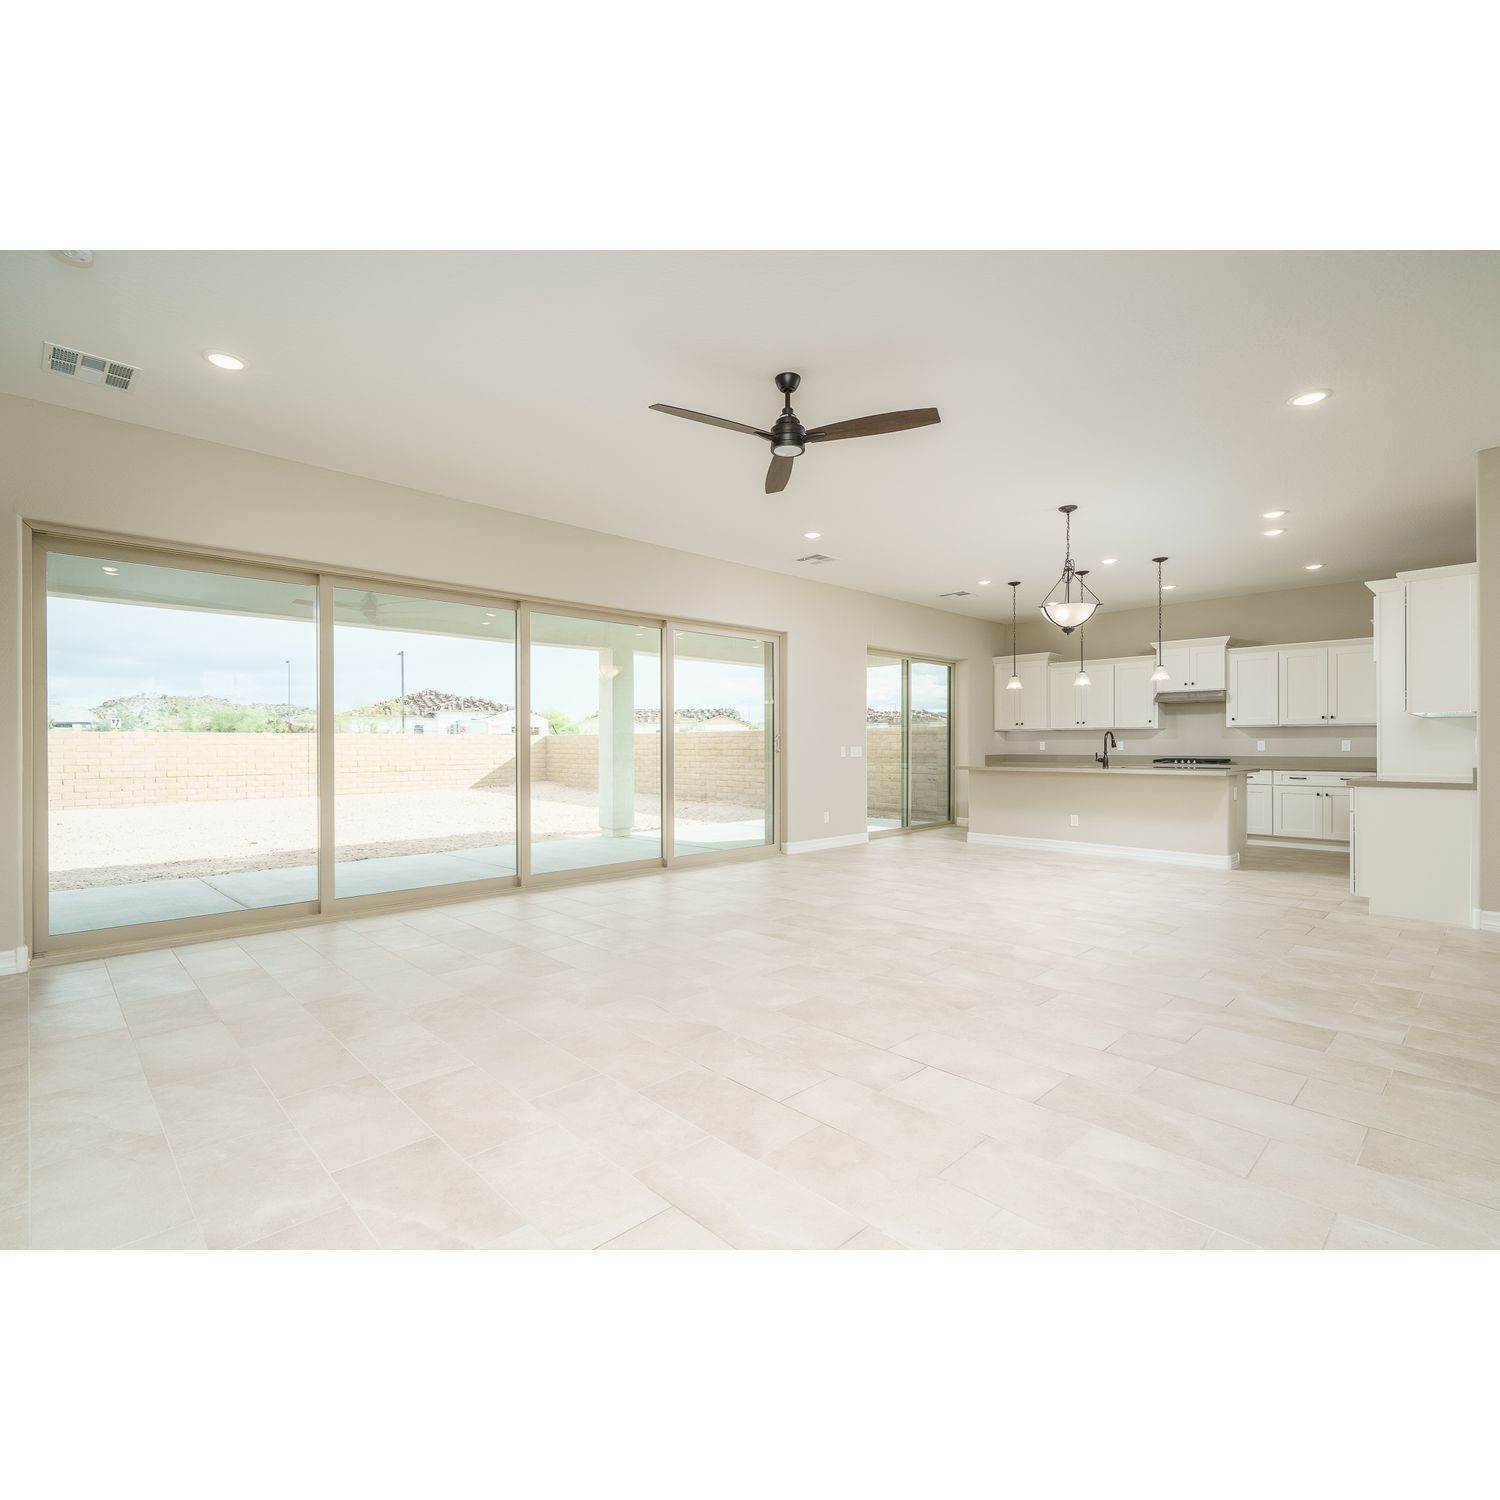 29. Single Family for Sale at Harmony At Montecito In Estrella 18624 W Cathedral Rock Drive, Goodyear, AZ 85338